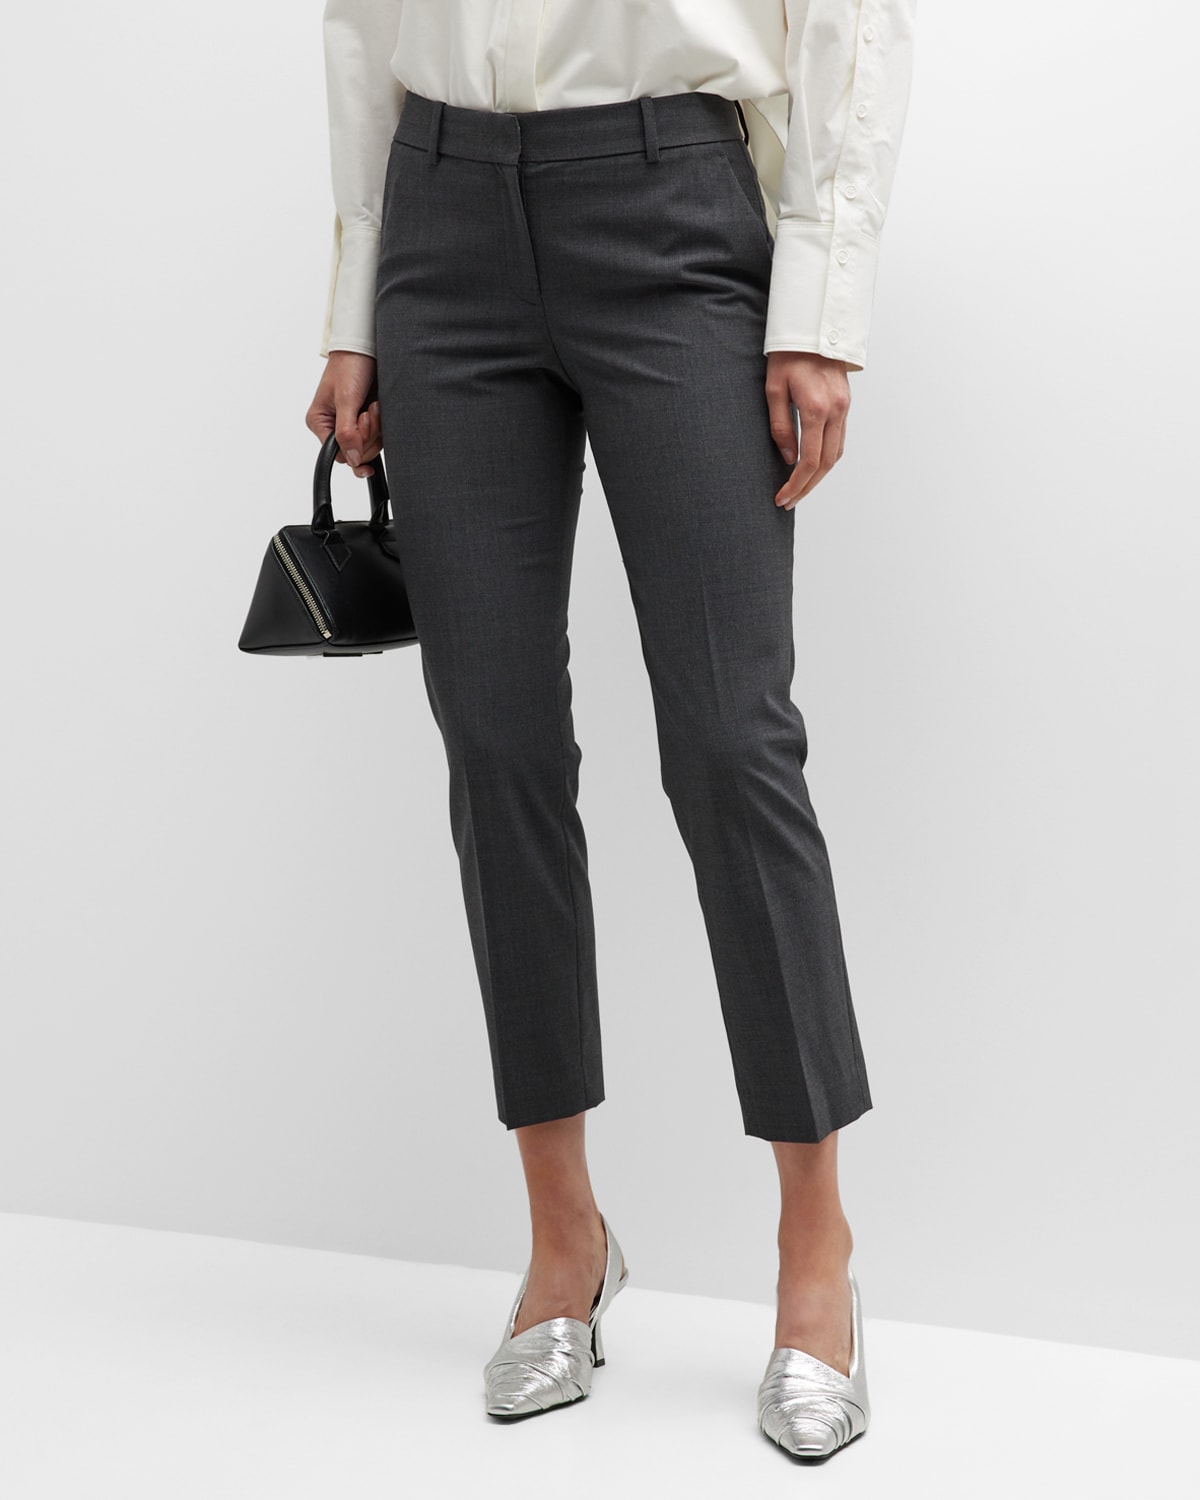 Theory Grey Slim Cropped High Rise Pull-On Pant in Wool Flannel